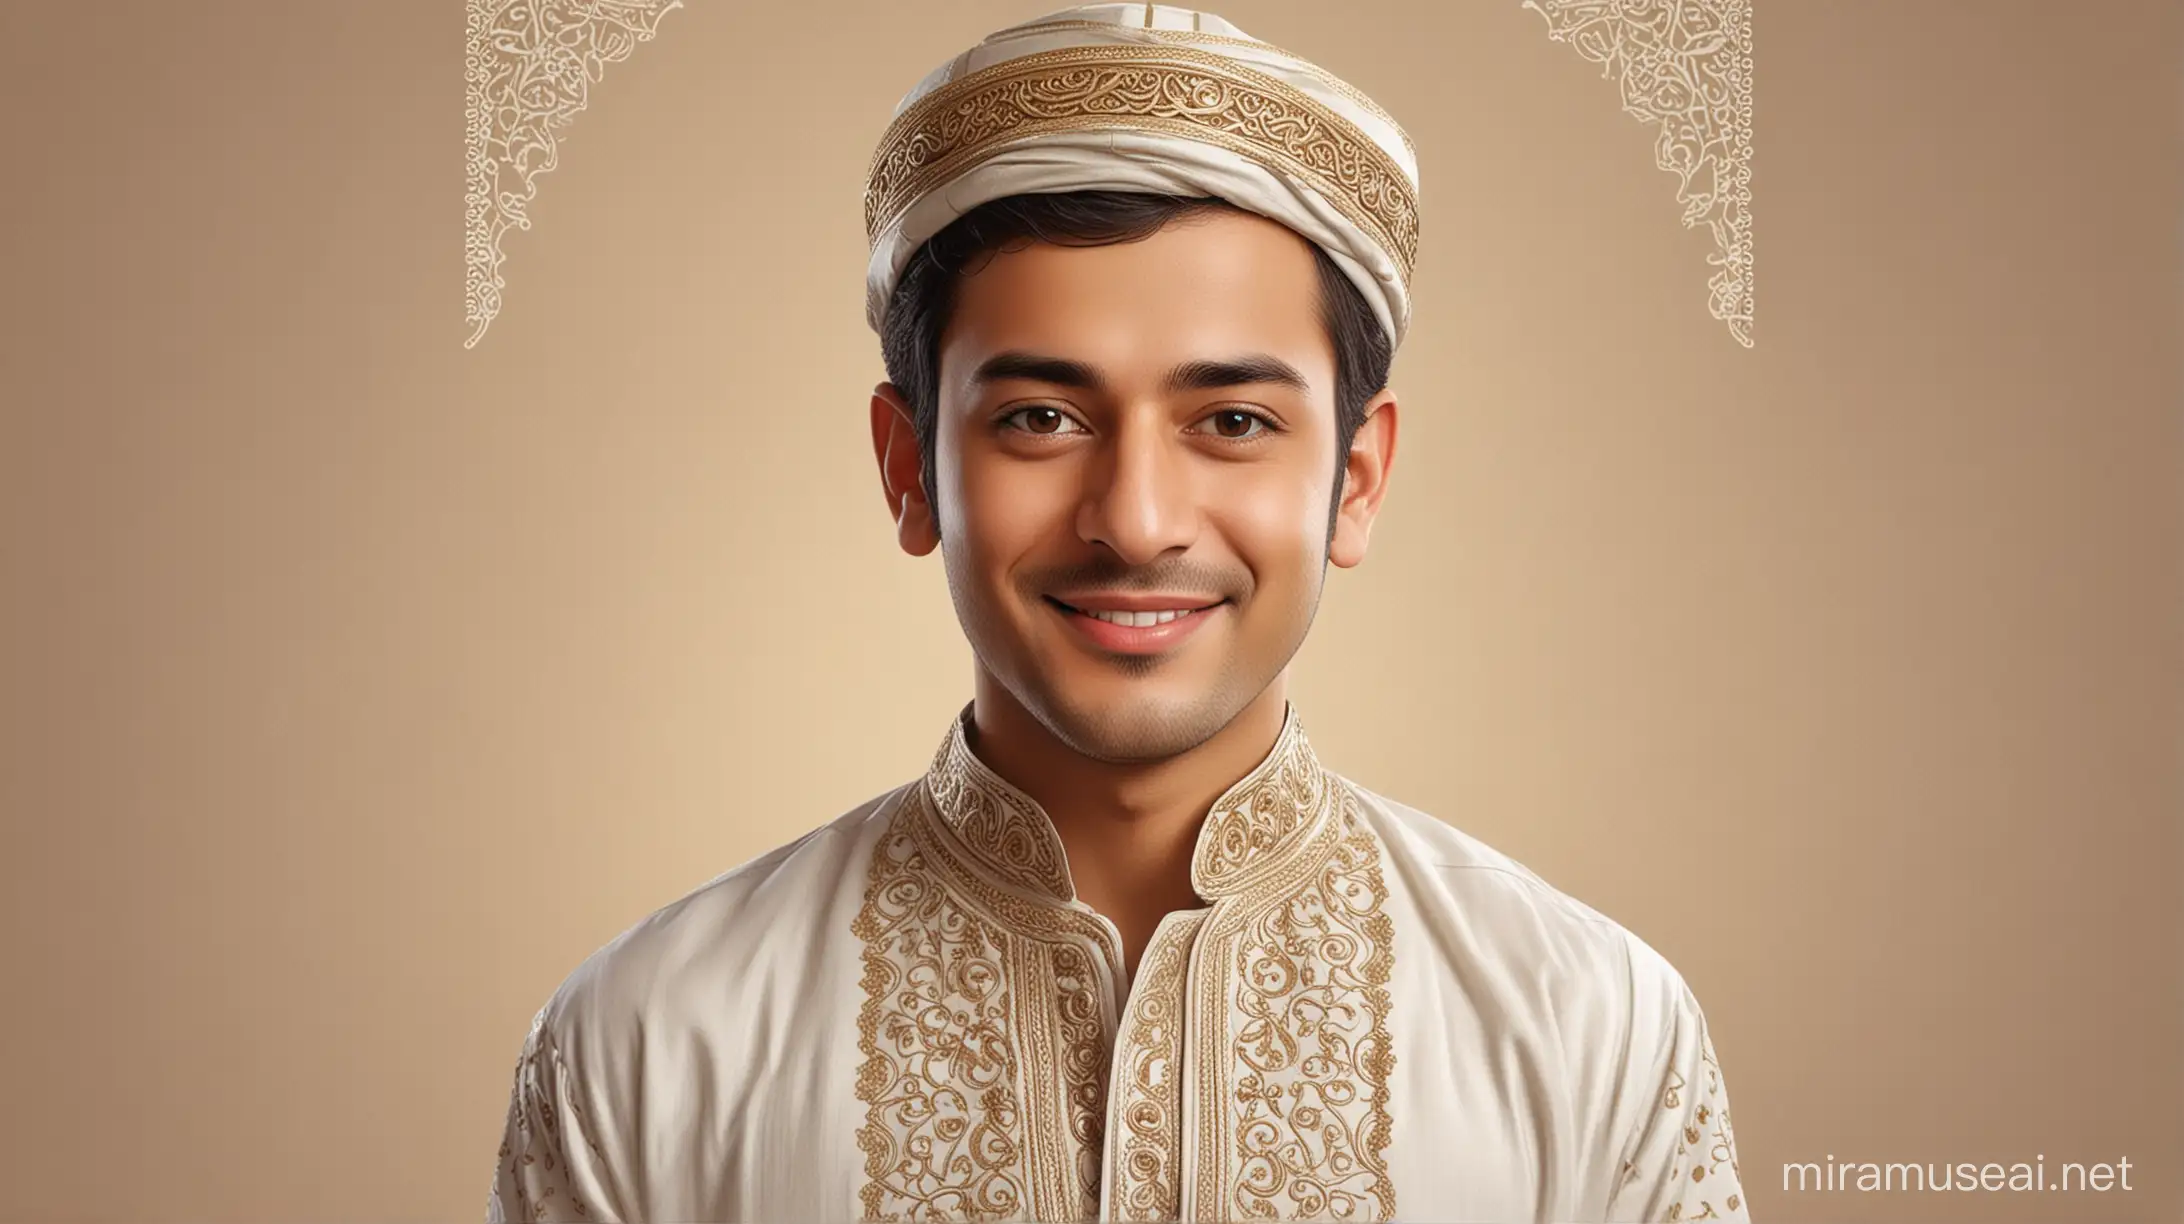 "Design realistic greeting card featuring a 30-year-old Pakistani boy dressed in traditional Islamic clothing, extending warm congratulations to all Muslims on the occasion of Eid-Al-Fitr. Let his sincere expression convey the joy and unity of this festive celebration. In the background, elegantly incorporate the message 'Eid-Al-Fitr Mubarak blessings and happiness. to spread Subtly integrate the trademark 'Faisal Qureshi' into the design, ensuring it complements the overall. Eid Mub